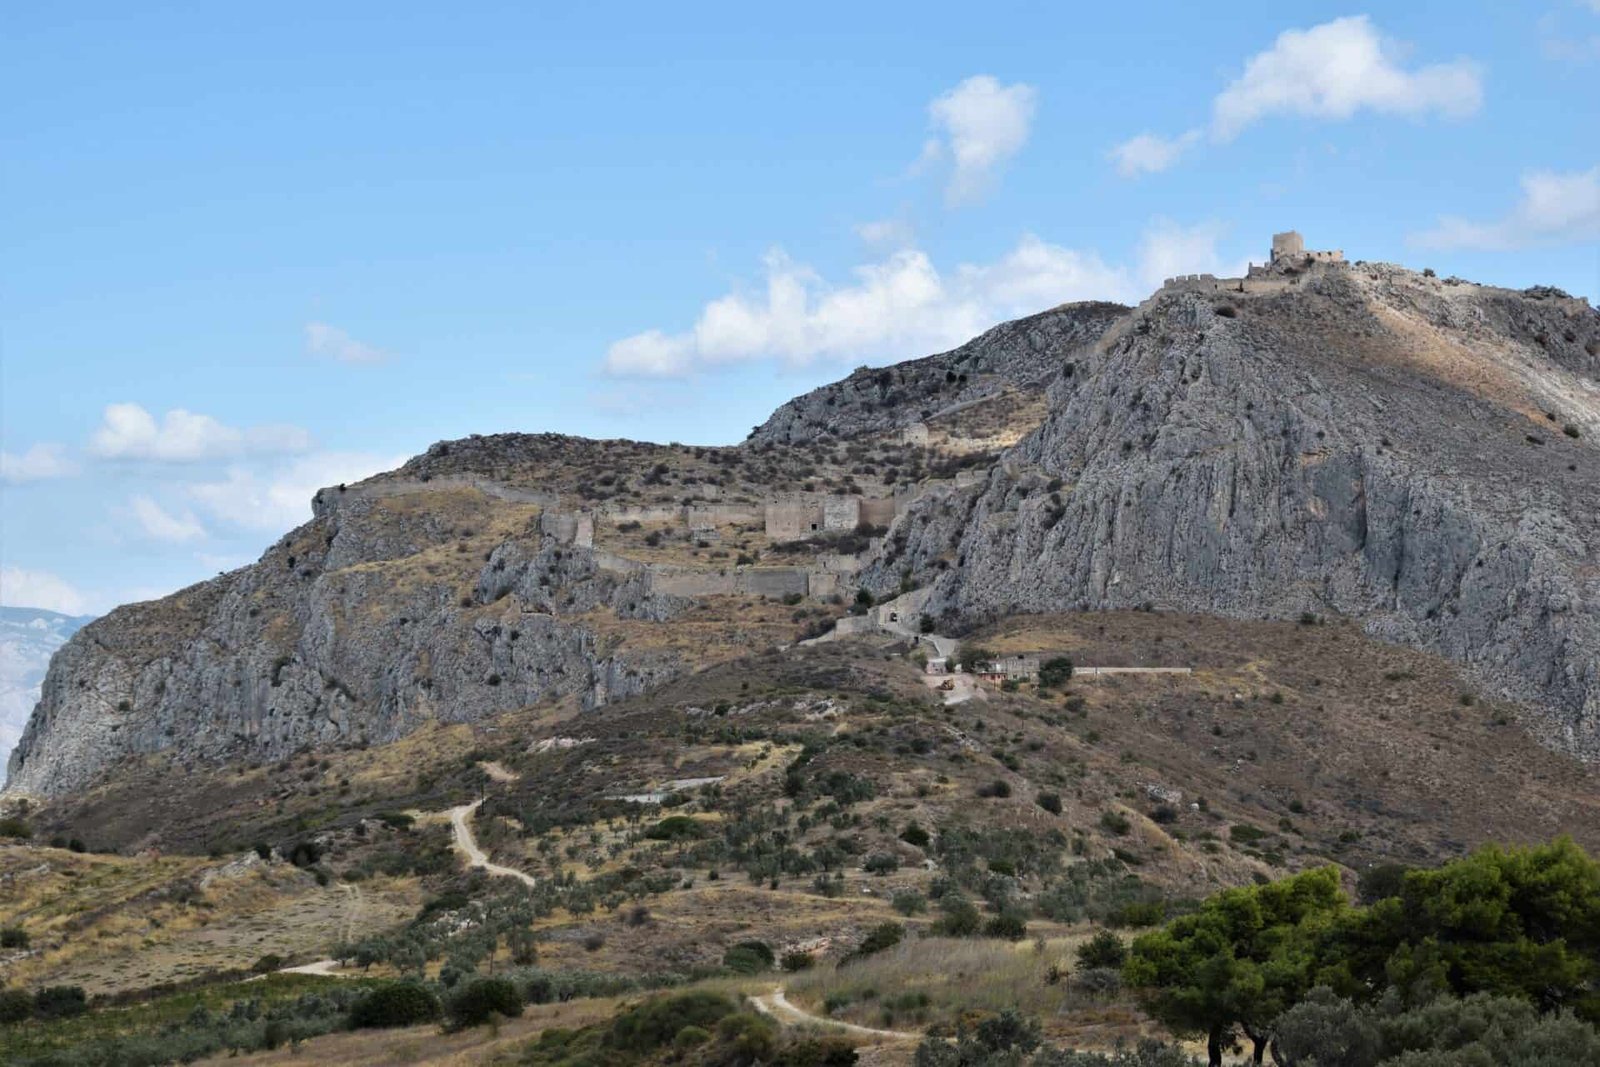 three massive walls, flanked by steep cliffsides, block of the sole entrance to the top of a table mountain boasting a stone watch tower on one peak